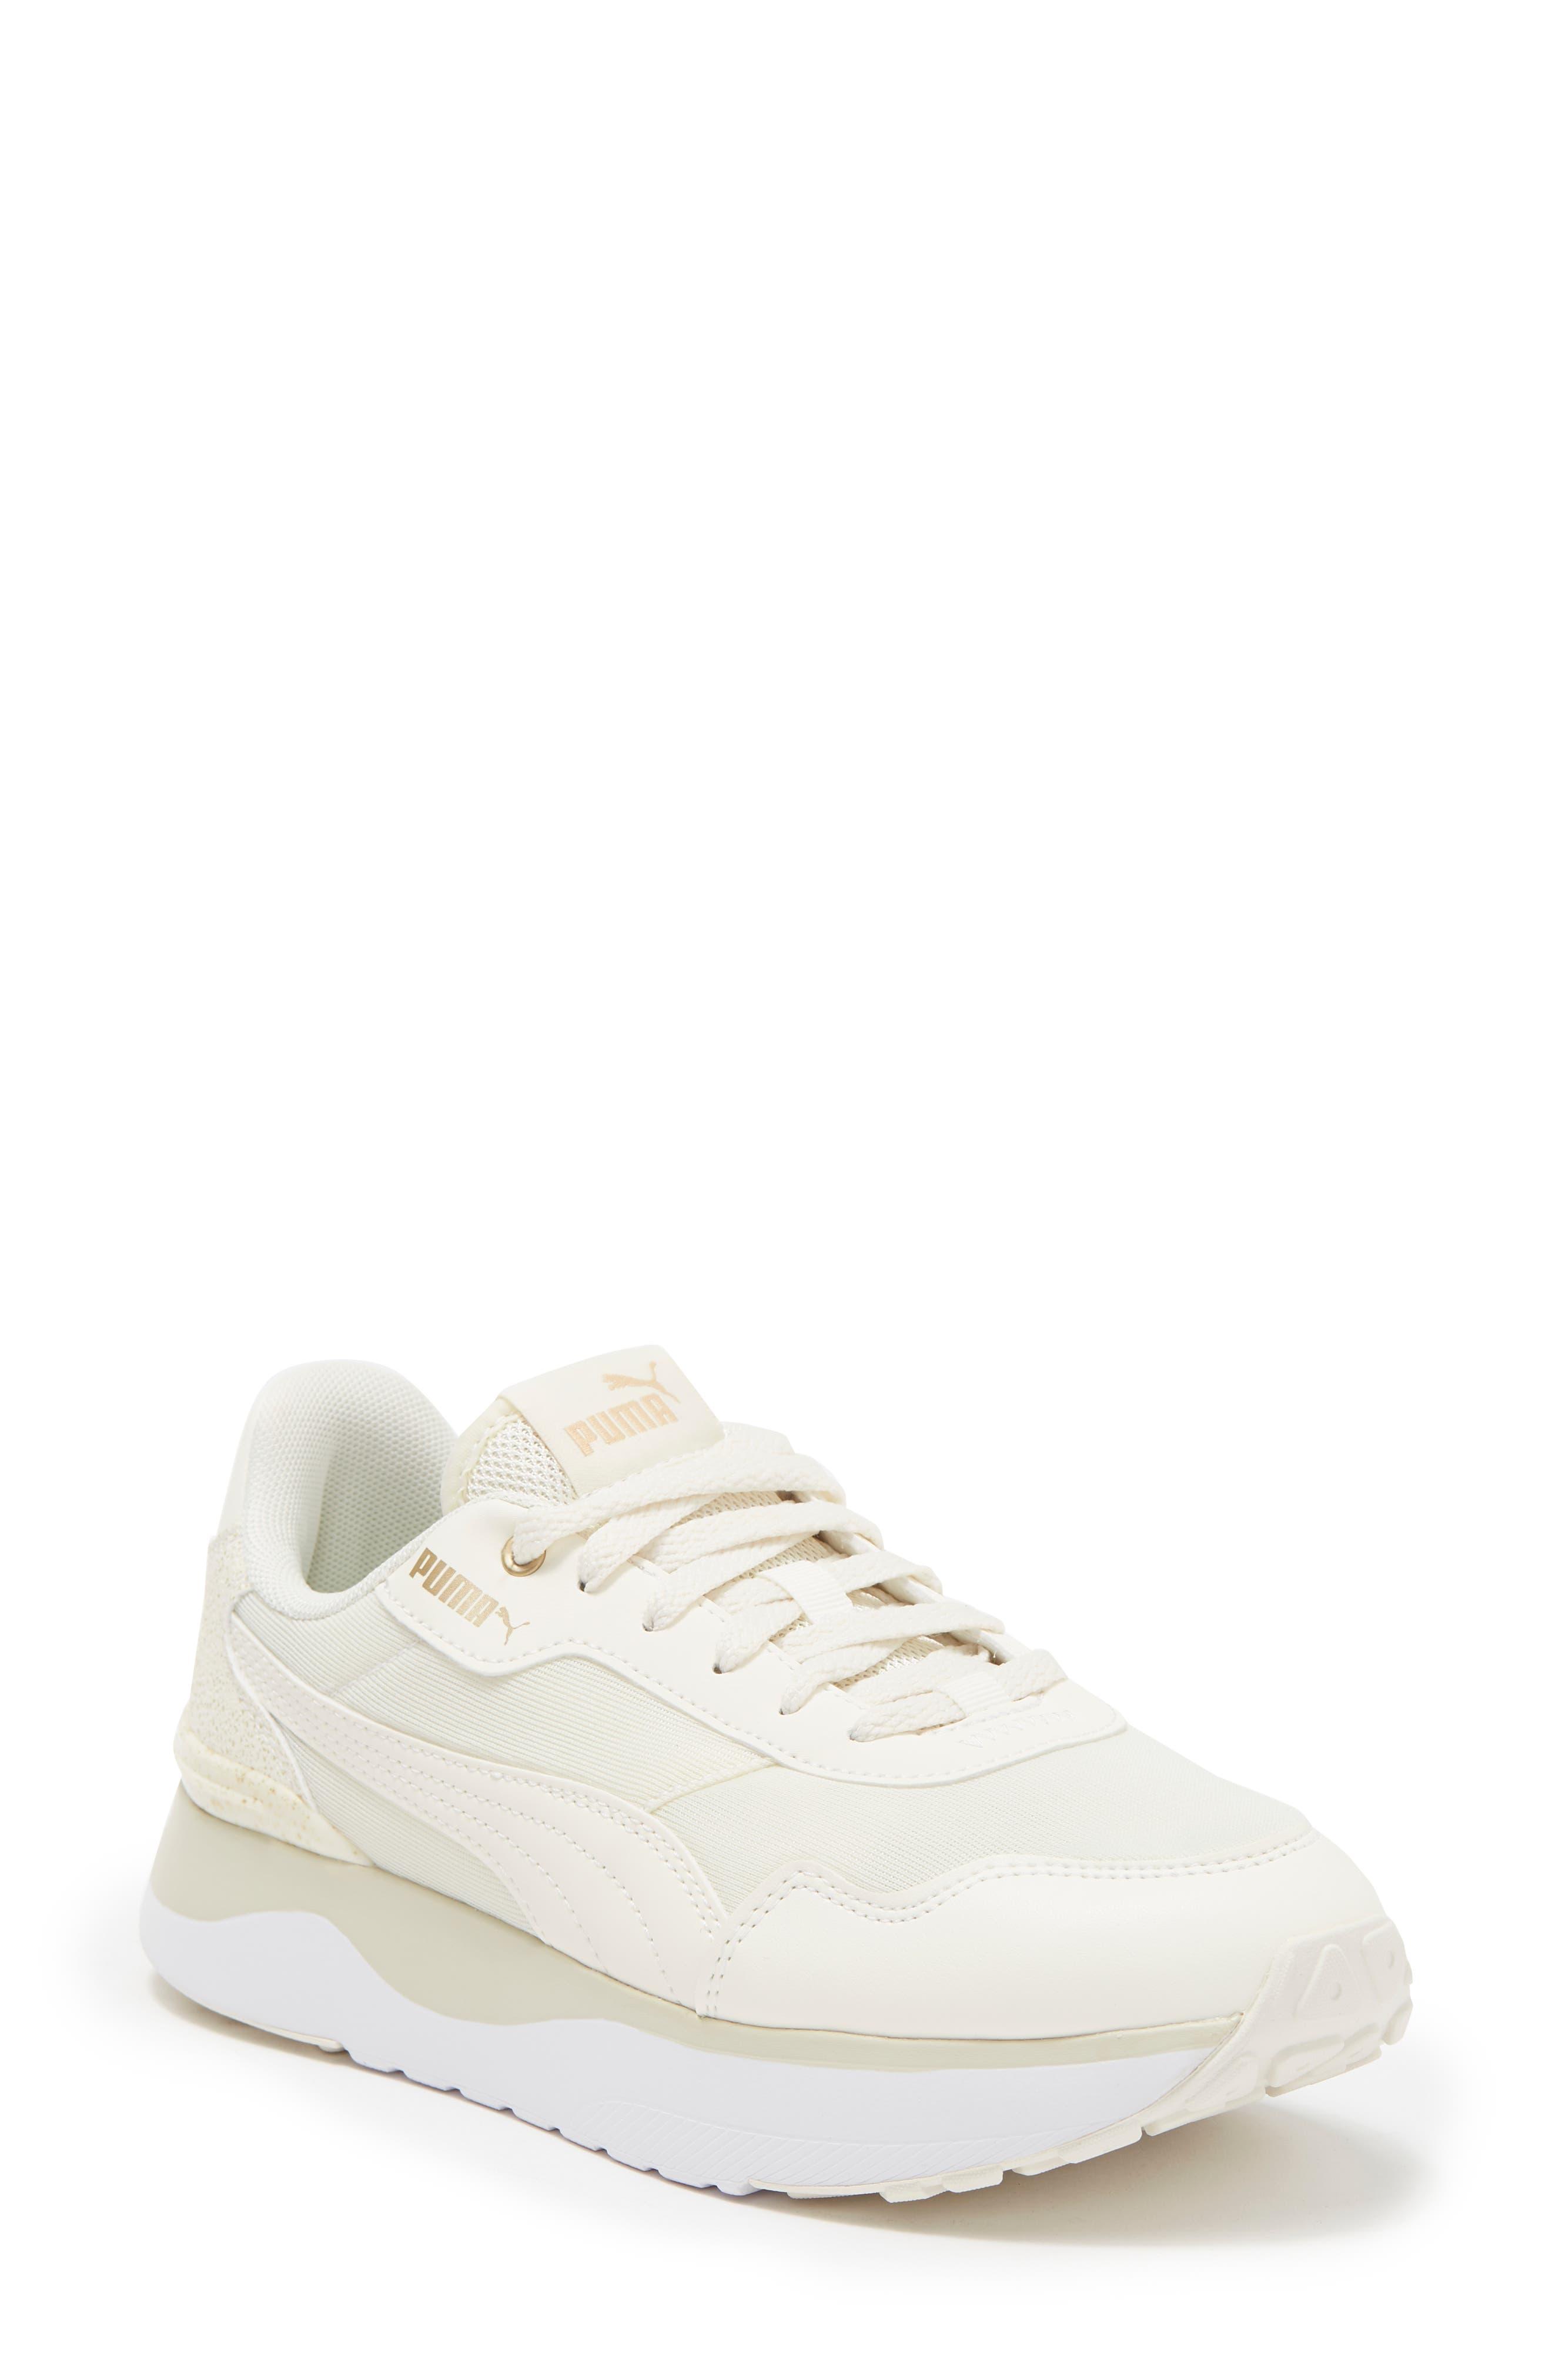 PUMA R78 Voyage Sneaker In Ivory-ivory-team Gold At Nordstrom Rack in White  | Lyst